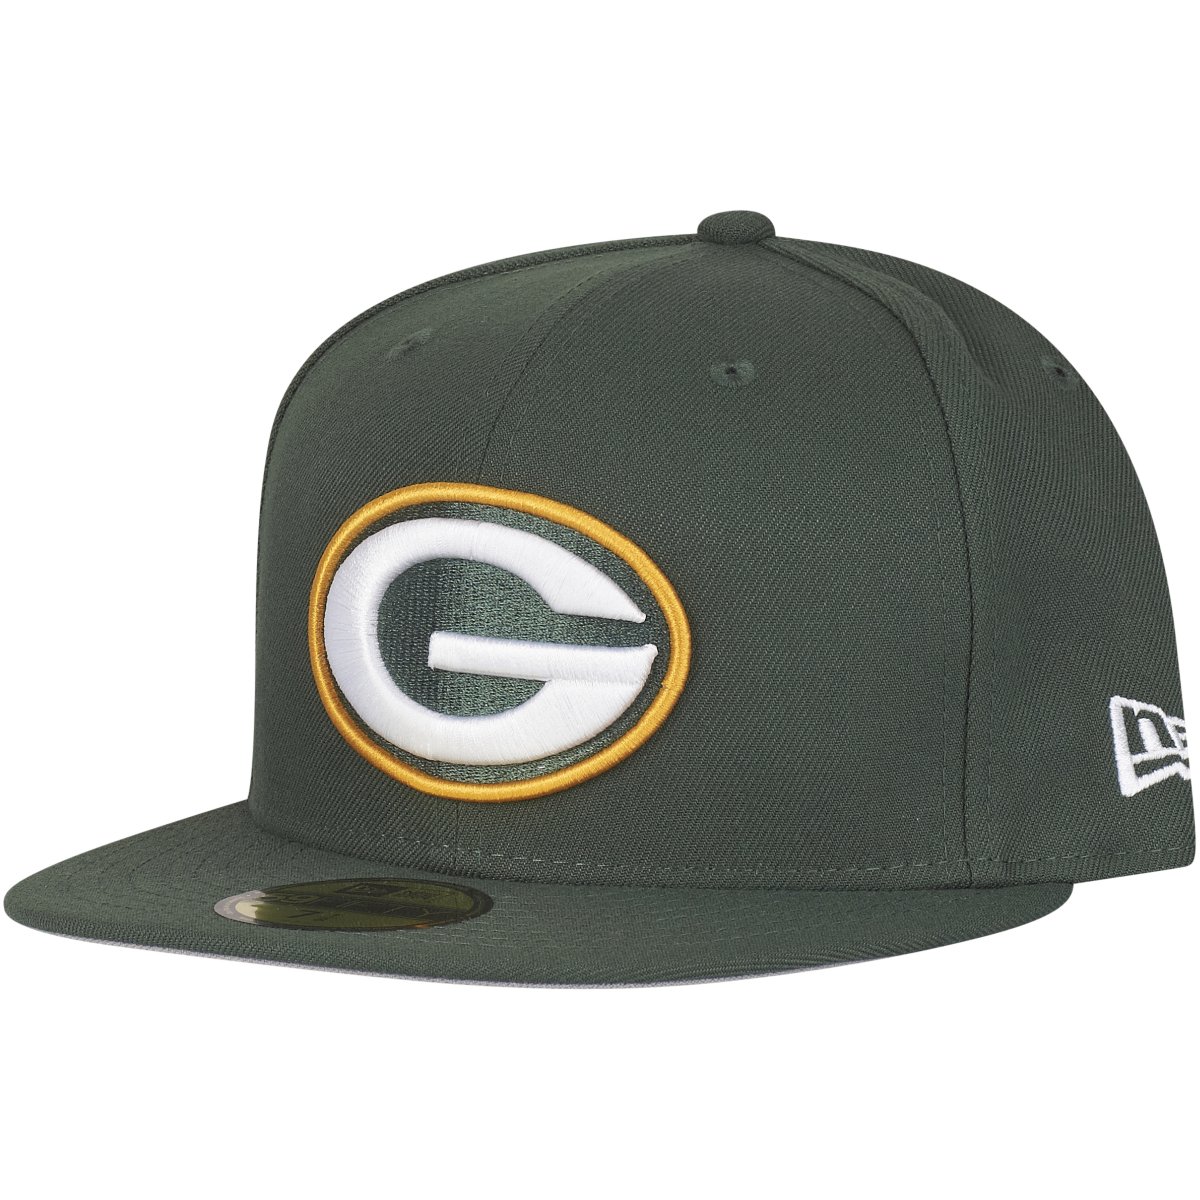 New Era 59Fifty Cap - NFL ON FIELD Green Bay Packers celtic | Fitted ...